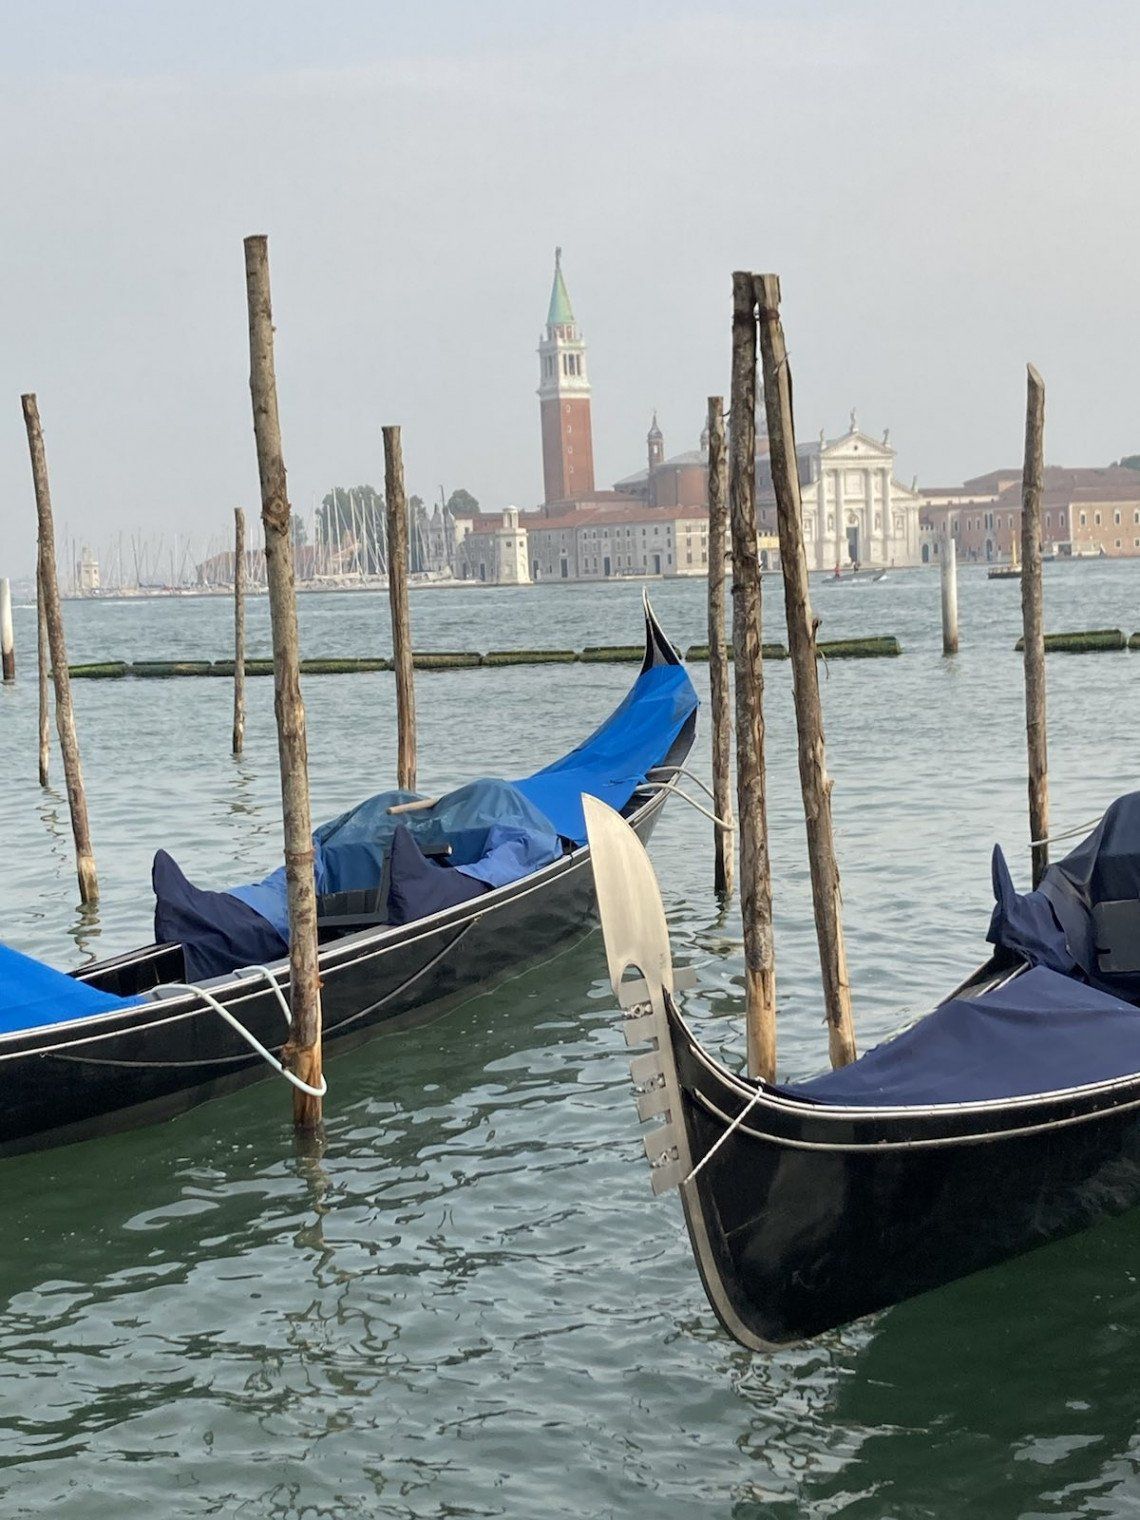 September Cruise to the warmth of the Venice Lagoon